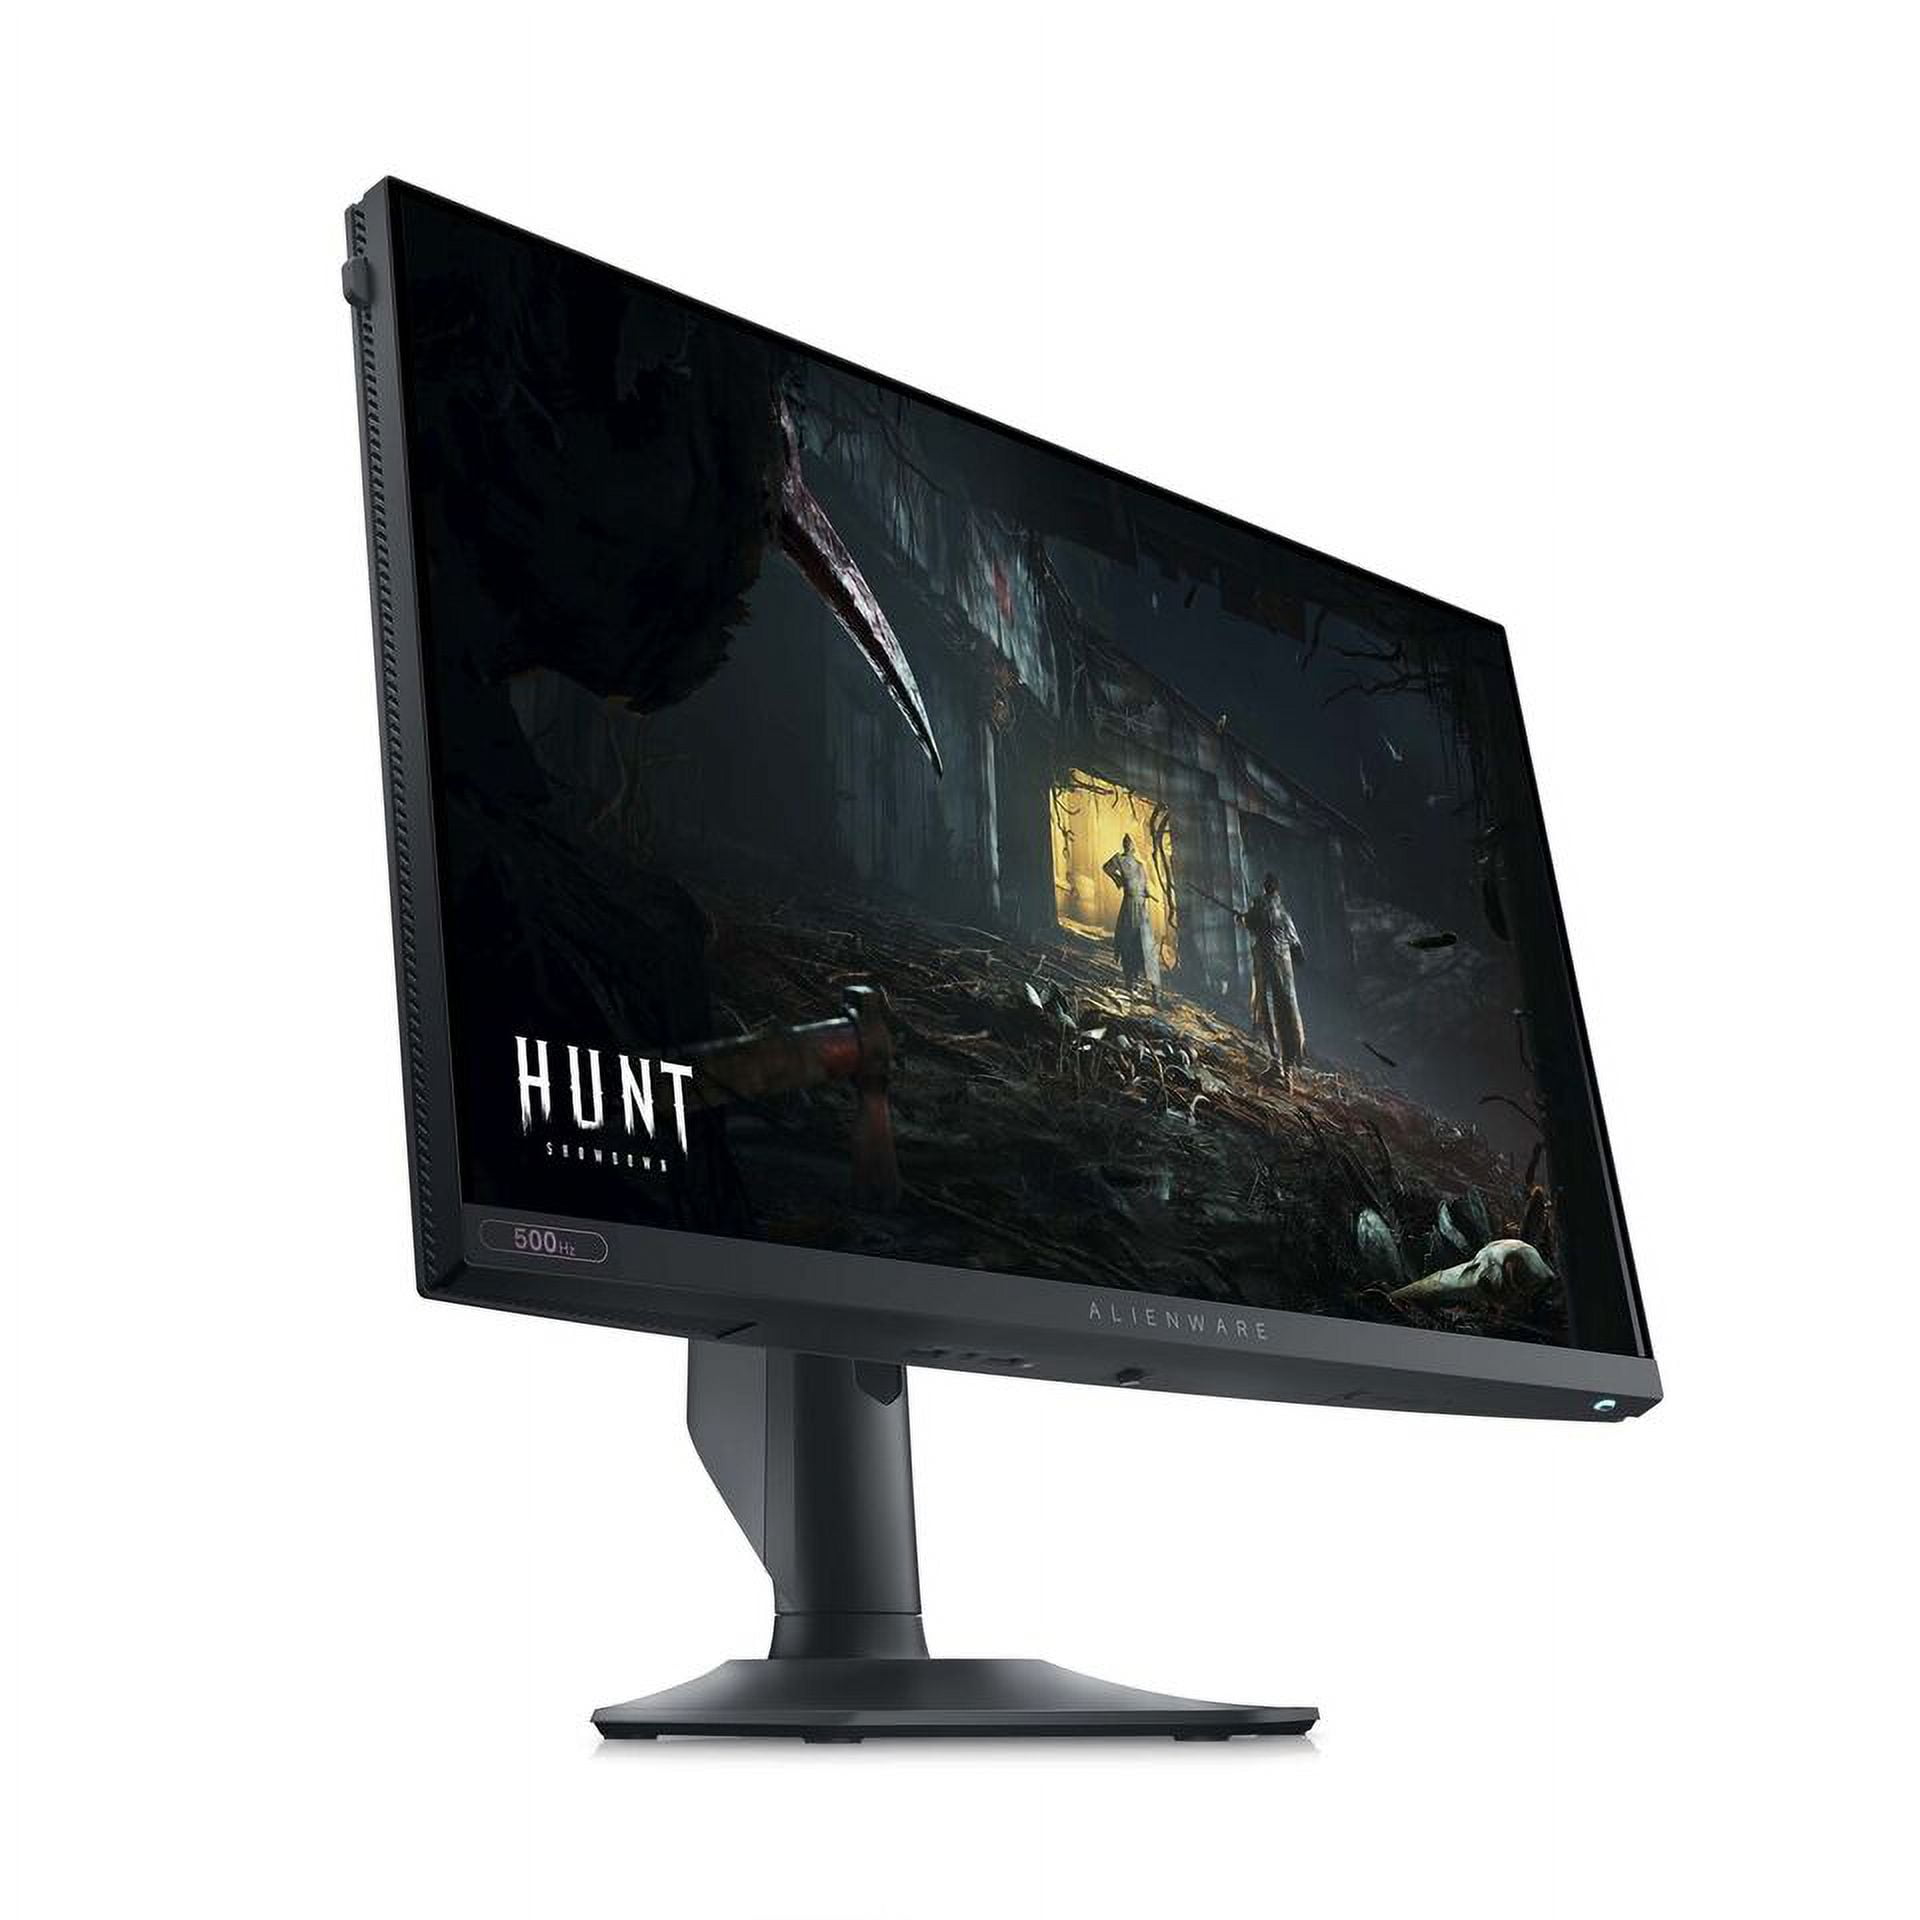 Dell Alienware 25 Gaming Flat Screen Monitor, 24.5 FHD Fast IPS